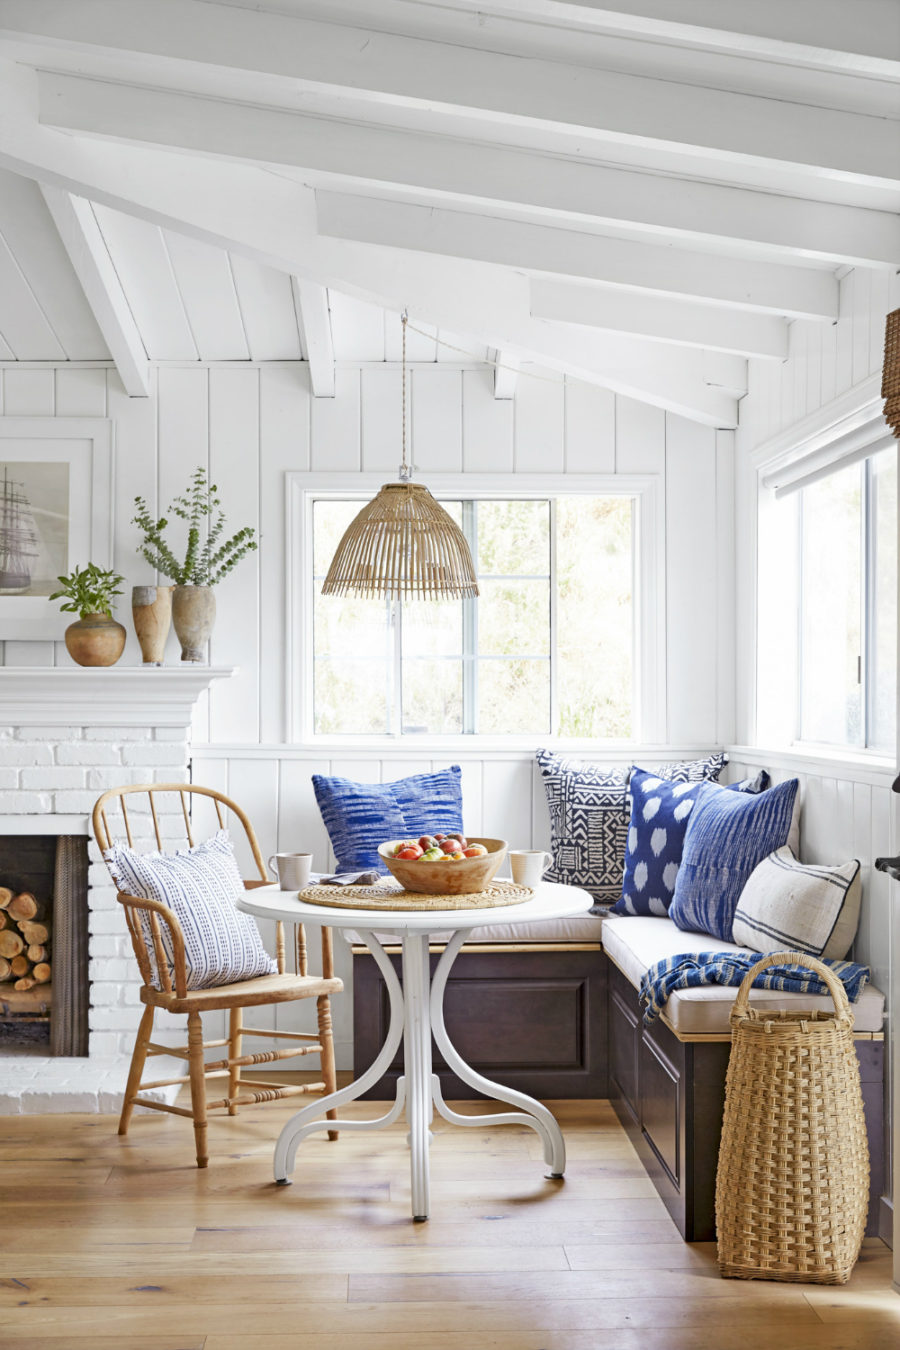 Sweet country-style breakfast table